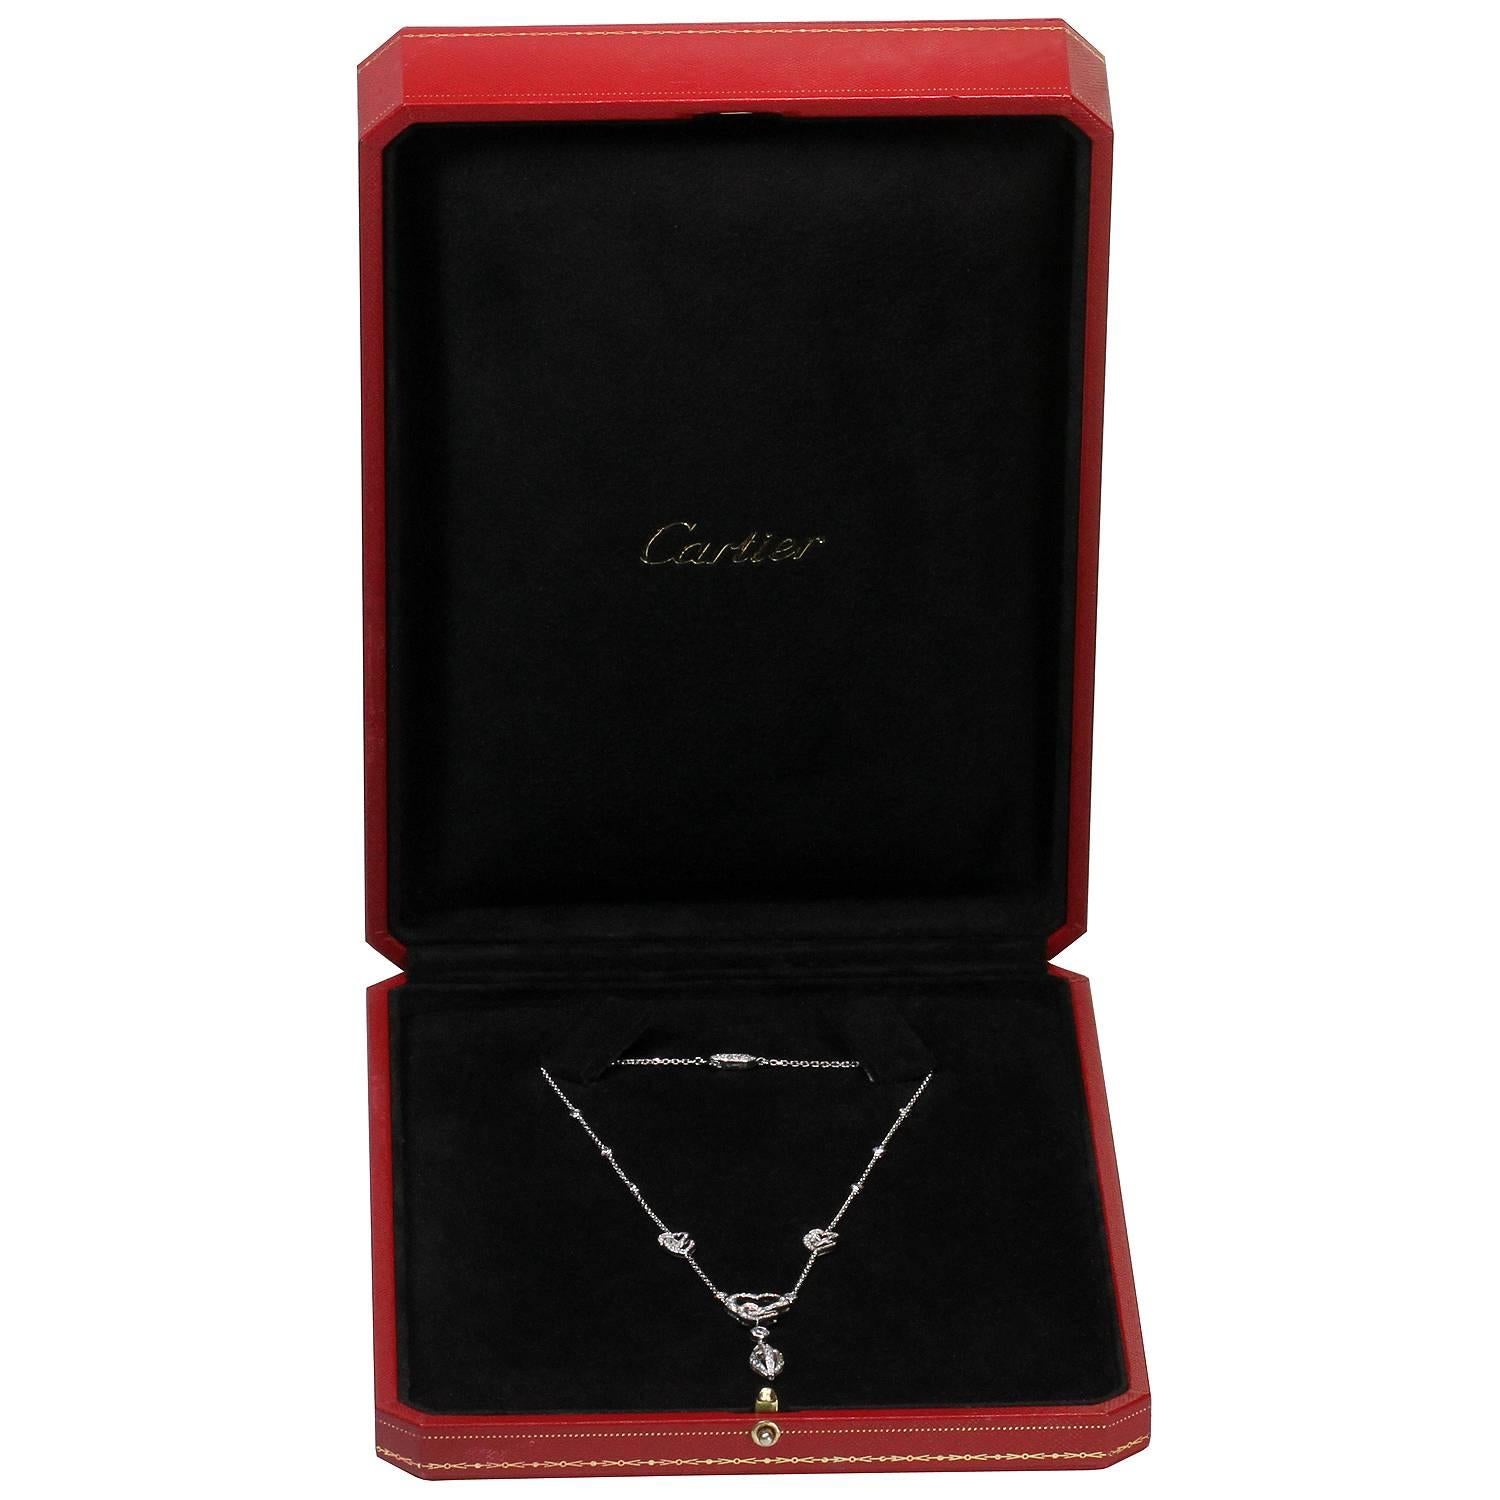 This exquisite Cartier necklace is crafted in 18k white gold and accented with brilliant-cut round diamonds featuring an elegant design of three double hearts, a pendant drop, bezel-set diamond accents, and a sparkling clasp pave set with diamonds